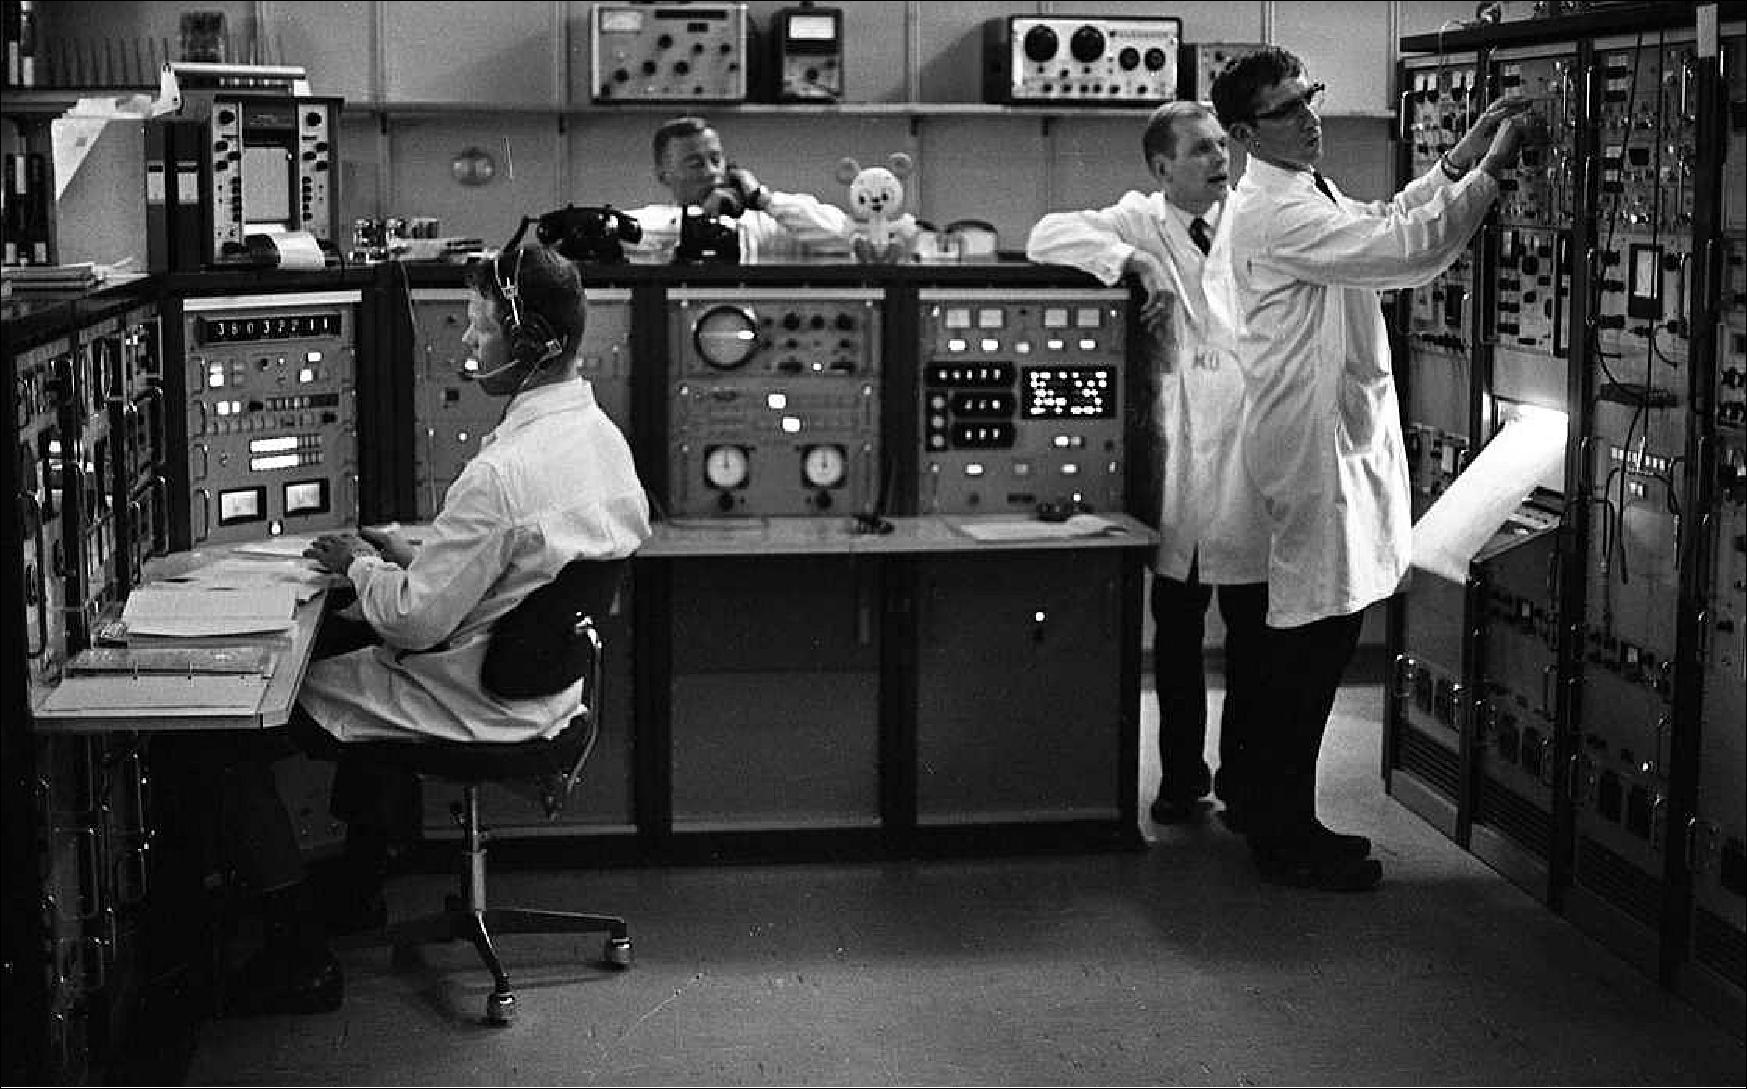 Figure 12: On May 17, 1968, the team at Tromsø Telemetry Station was able to celebrate that the first support of a satellite launch from the new station in Tromsø was successful. Extensive preparations had paid off - the satellite was in orbit (image credit: KSAT)